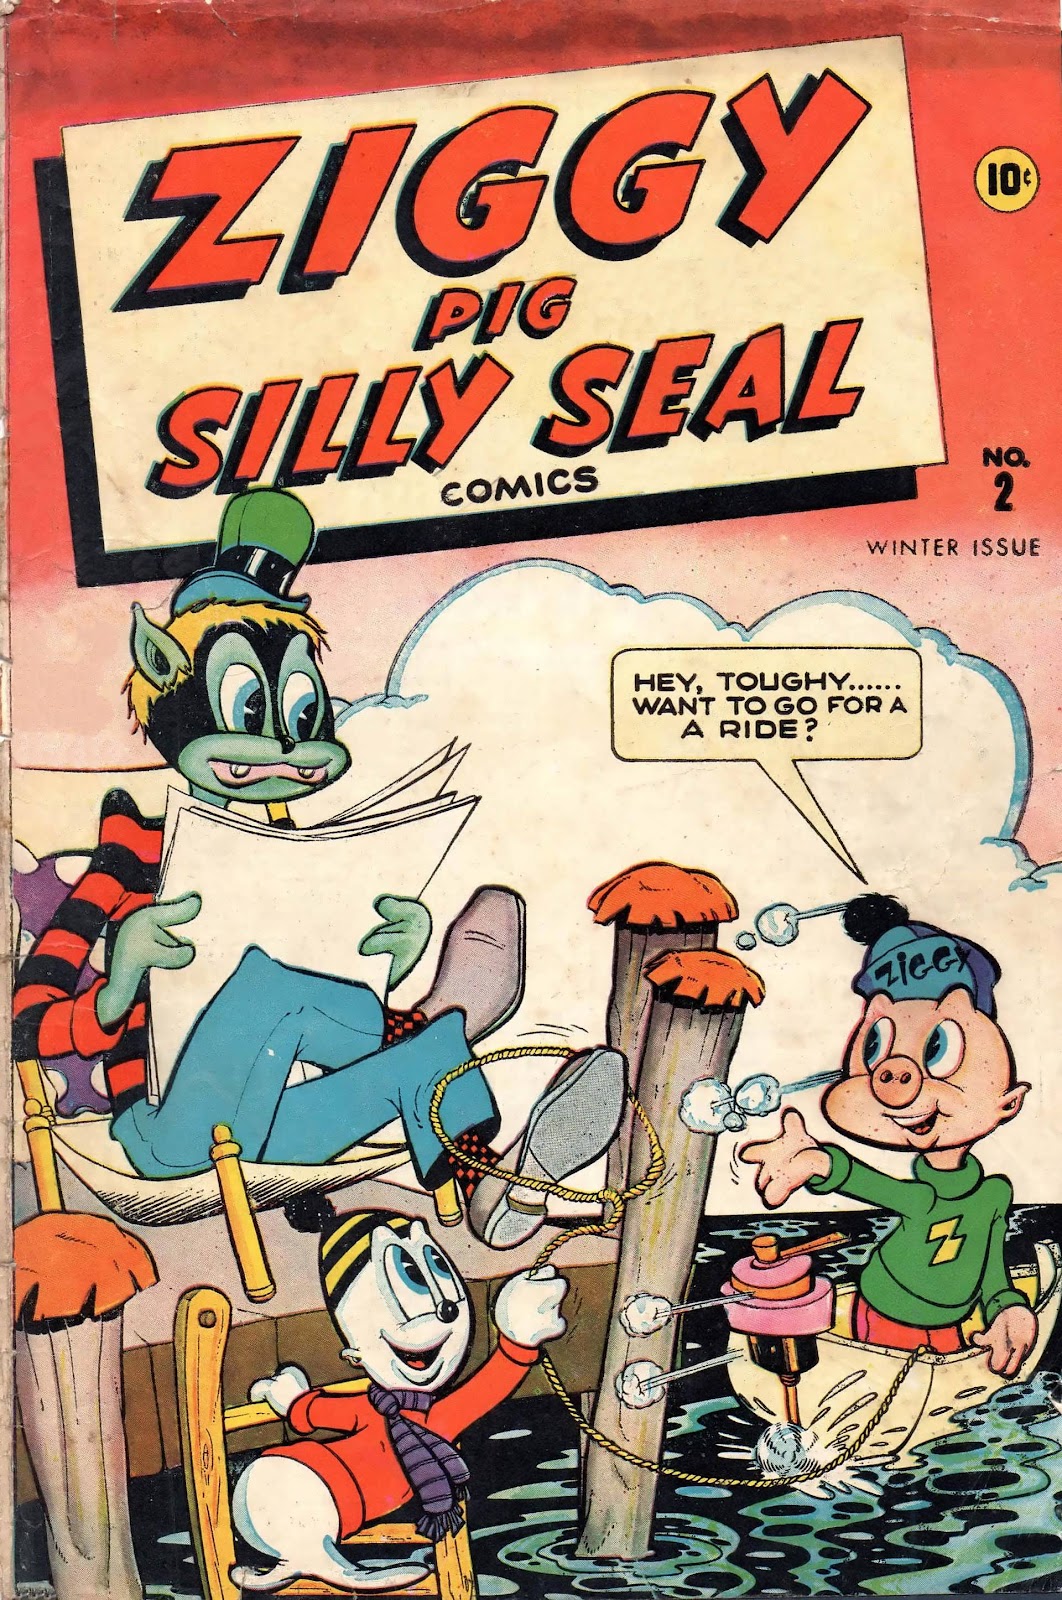 Ziggy Pig-Silly Seal Comics (1944) issue 2 - Page 1